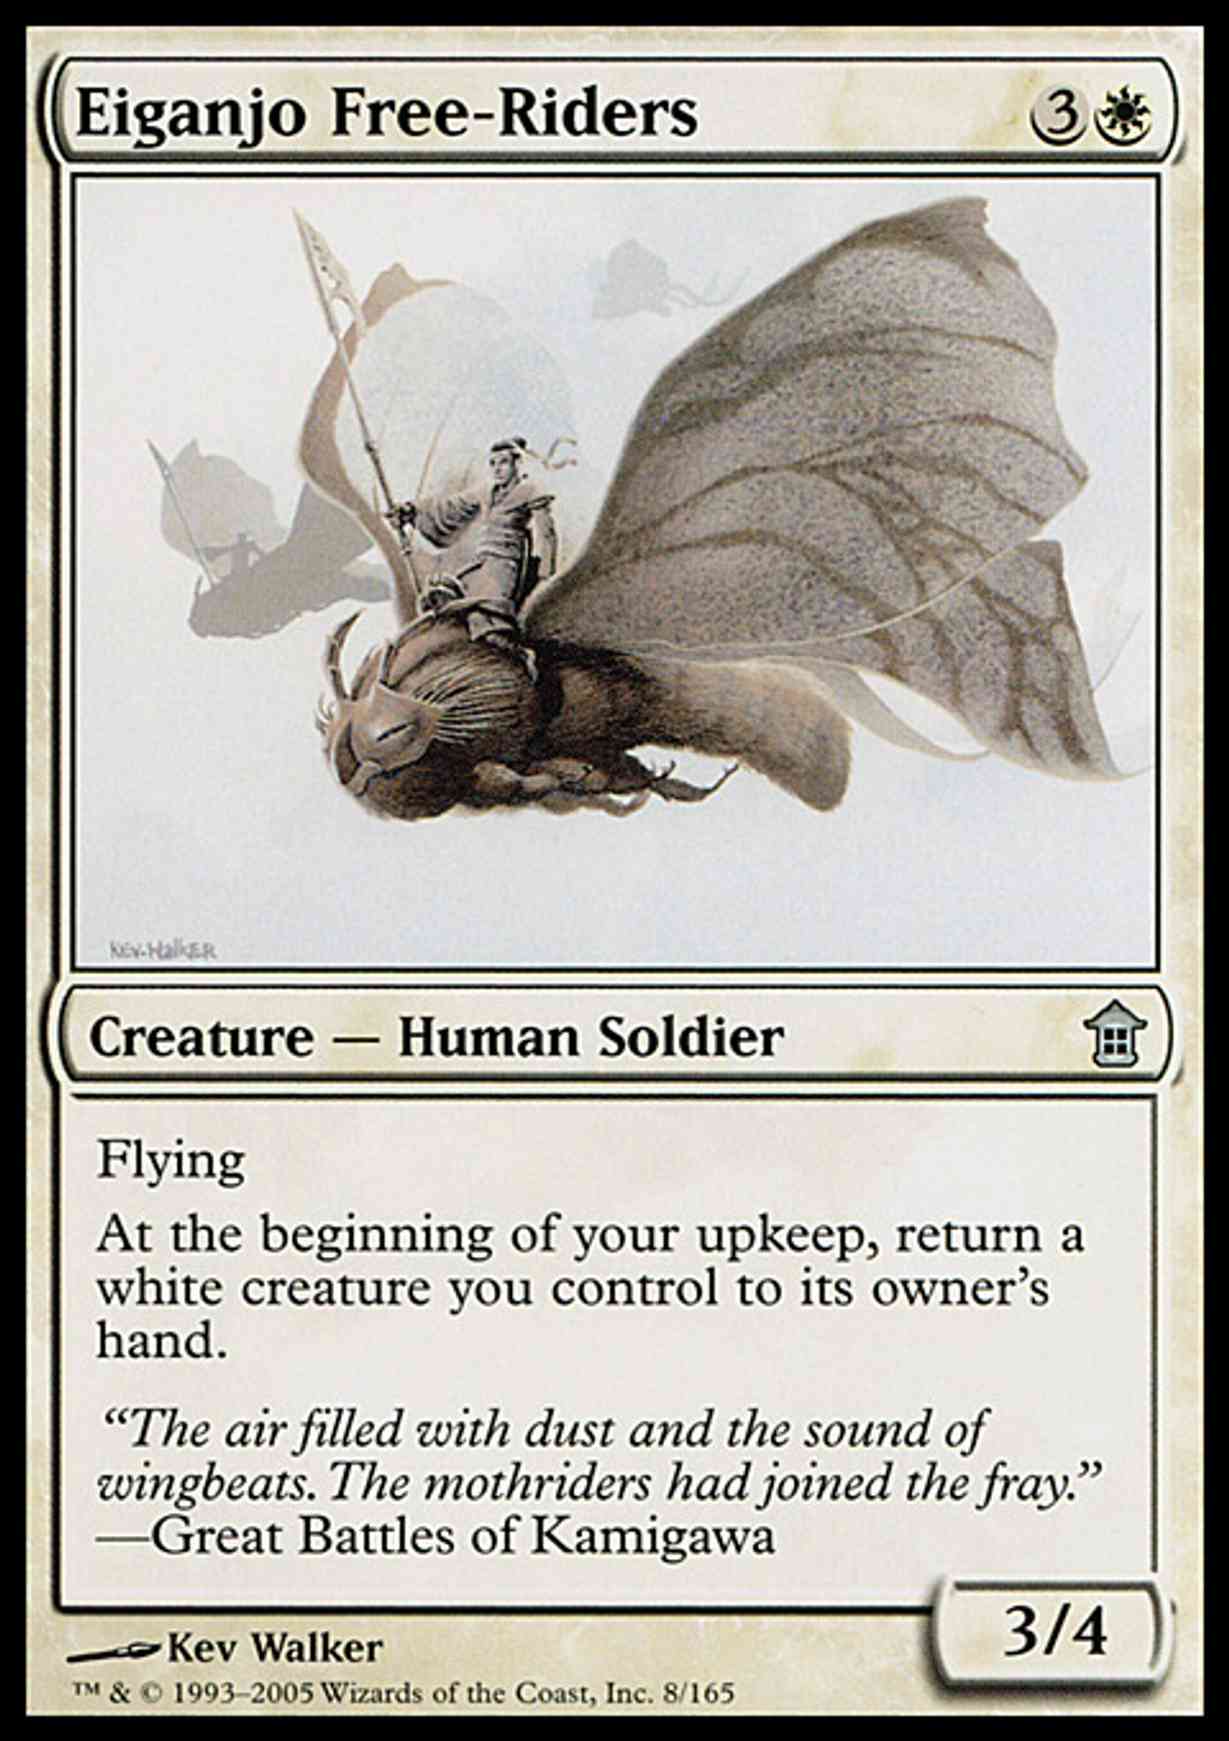 Eiganjo Free-Riders magic card front